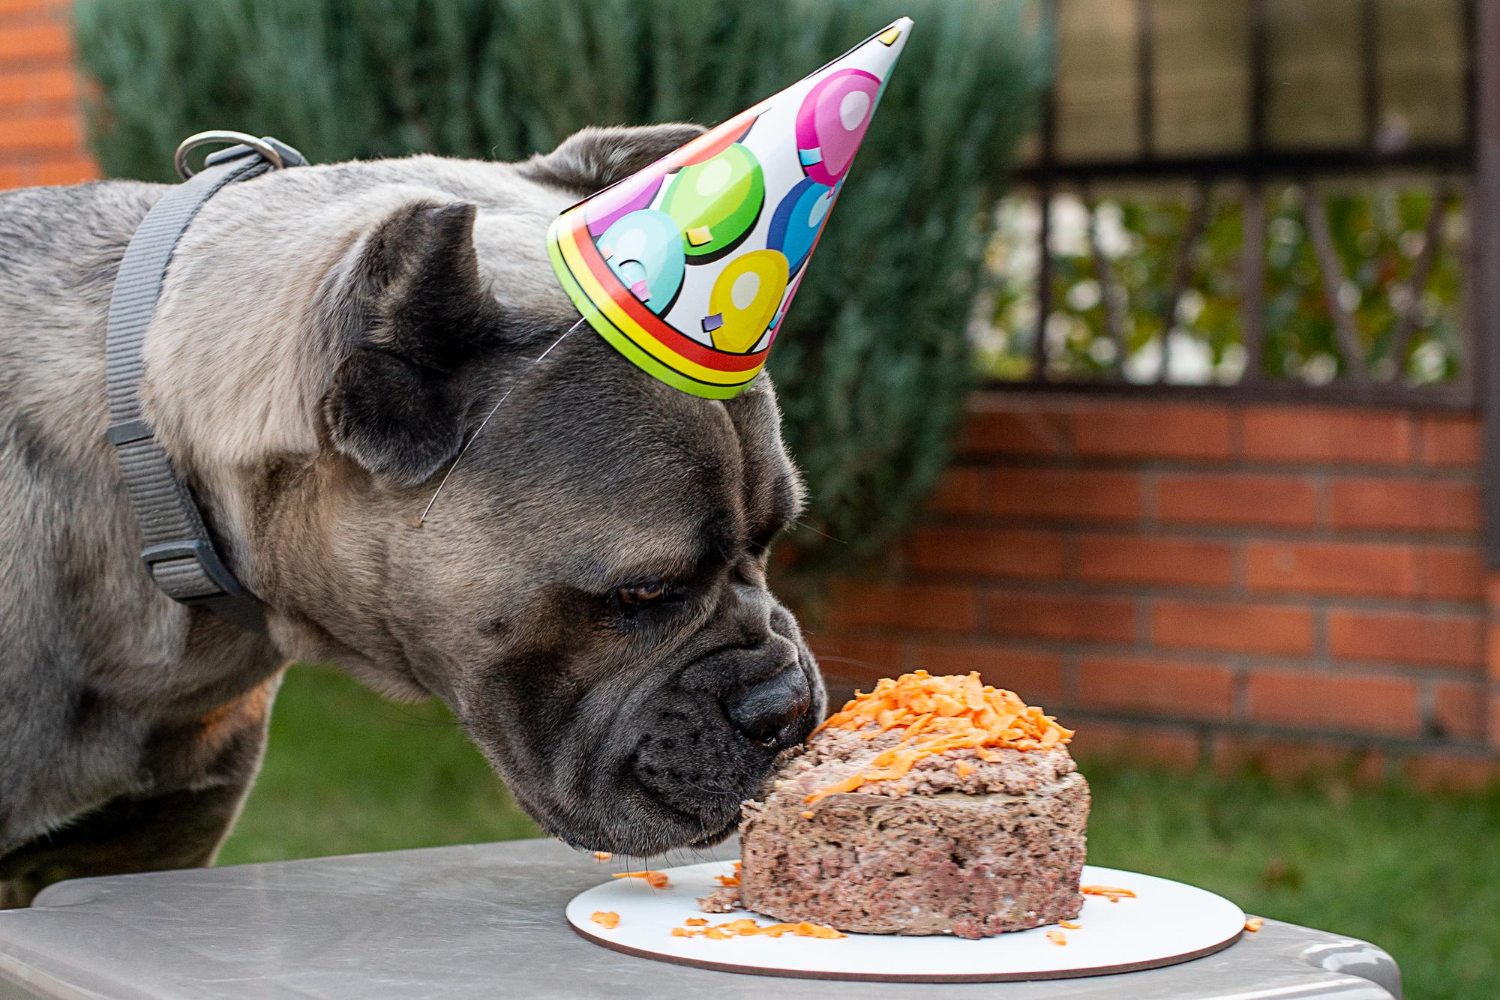 Your dog will love the meat cake as a gift!